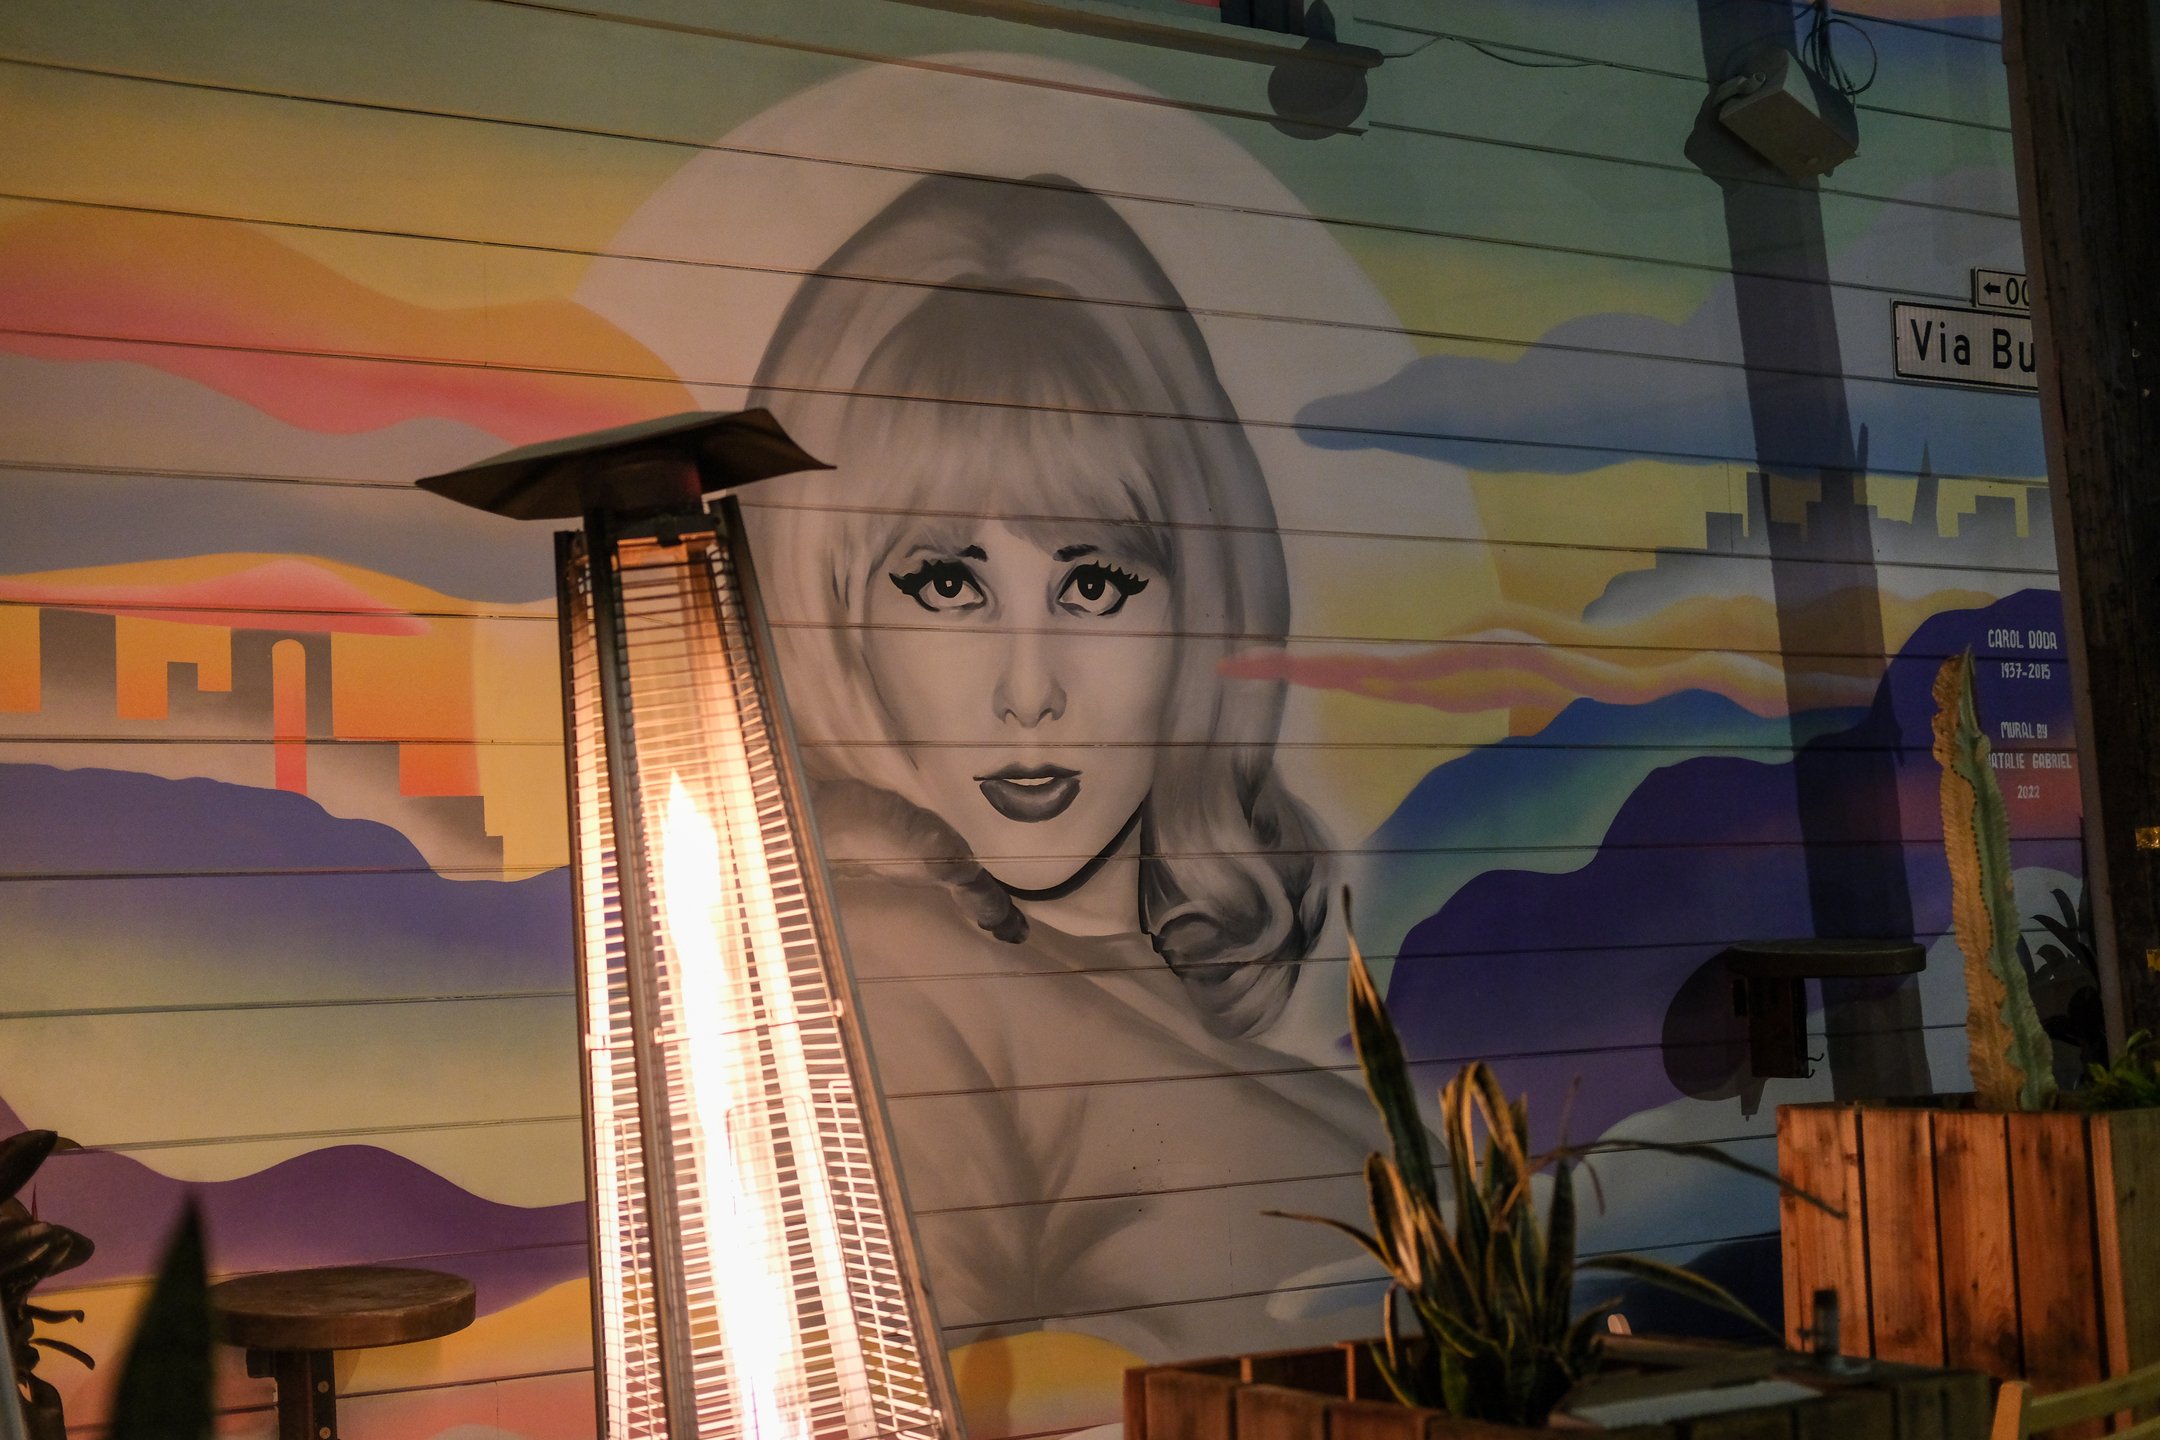 Mural of Carol Doda (a legendary stripper from the 70s) painted 